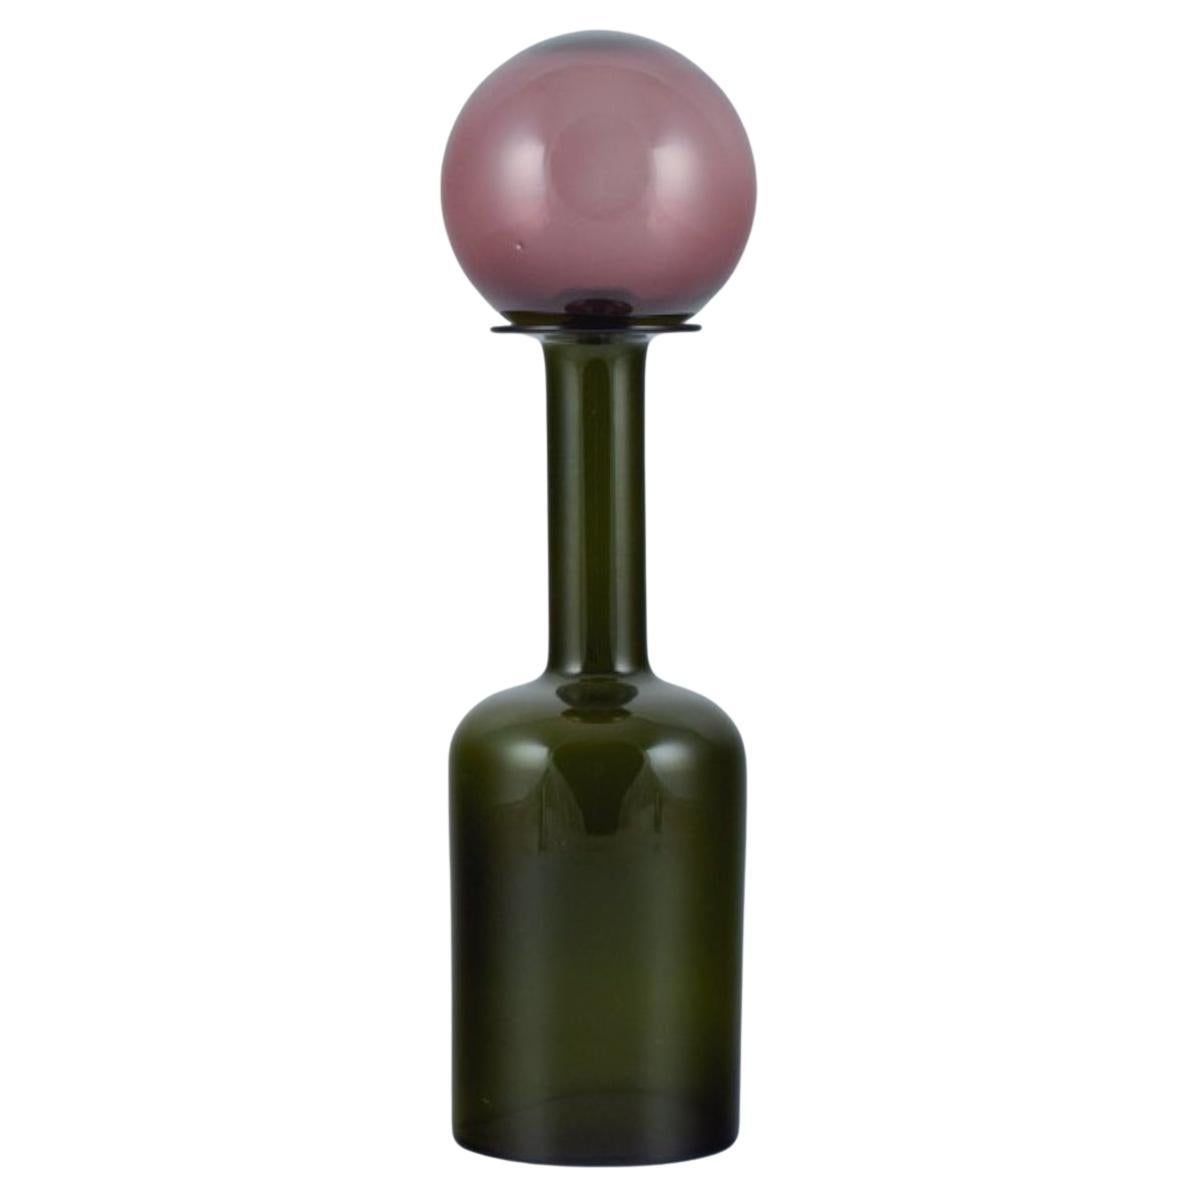 Otto Brauer for Holmegaard. Vase/bottle in green art glass with purple ball. For Sale